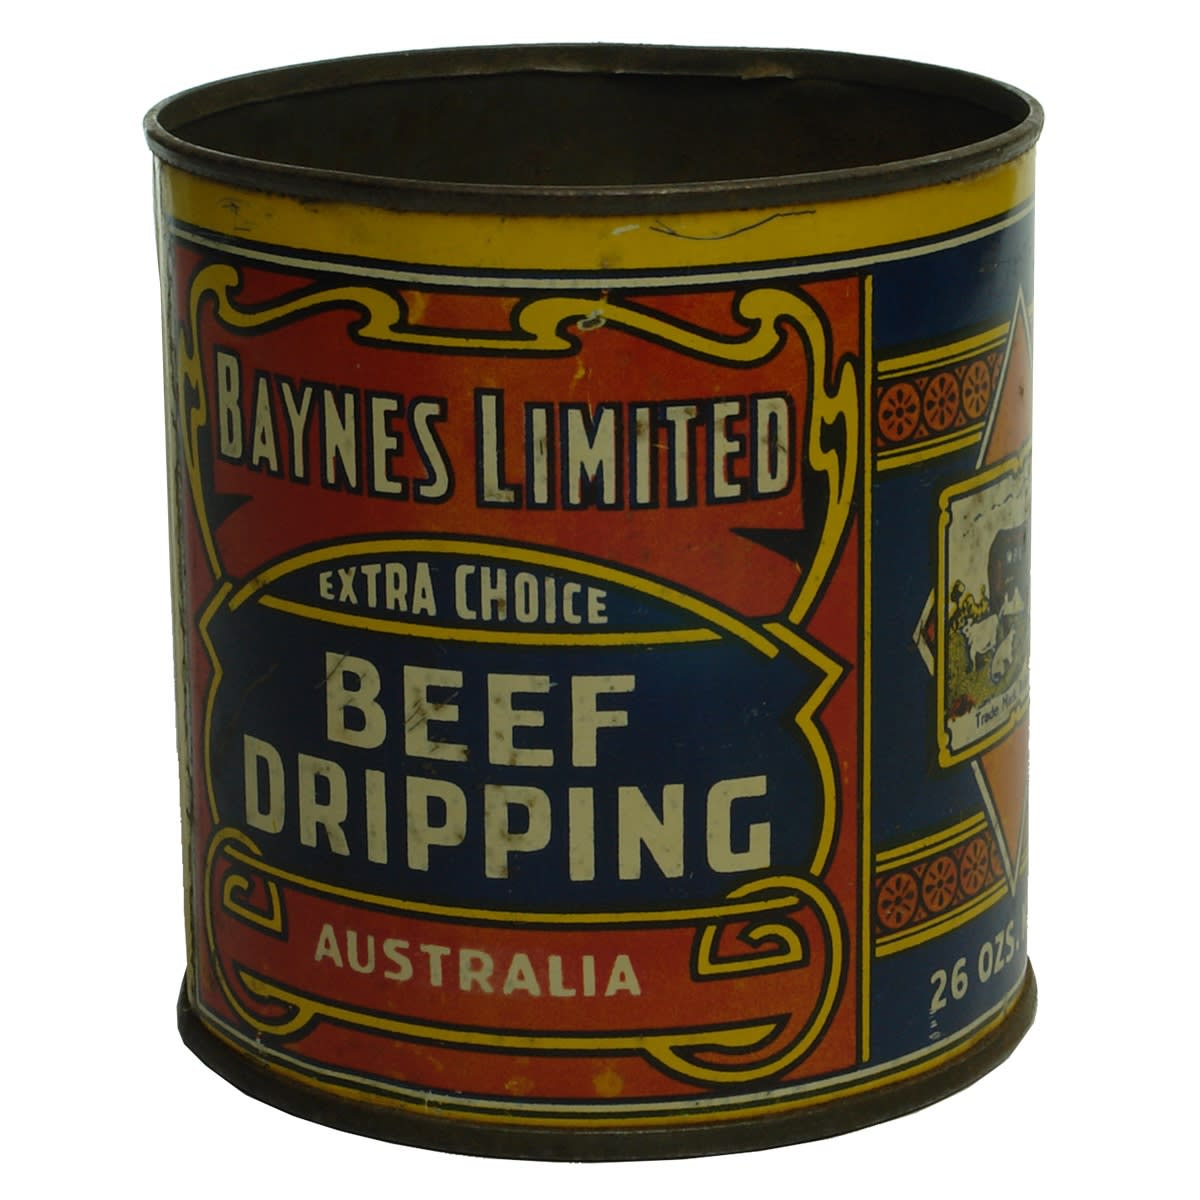 Tin. Barnes Limited Extra Choice Beef Dripping. Prime Queensland Stock.